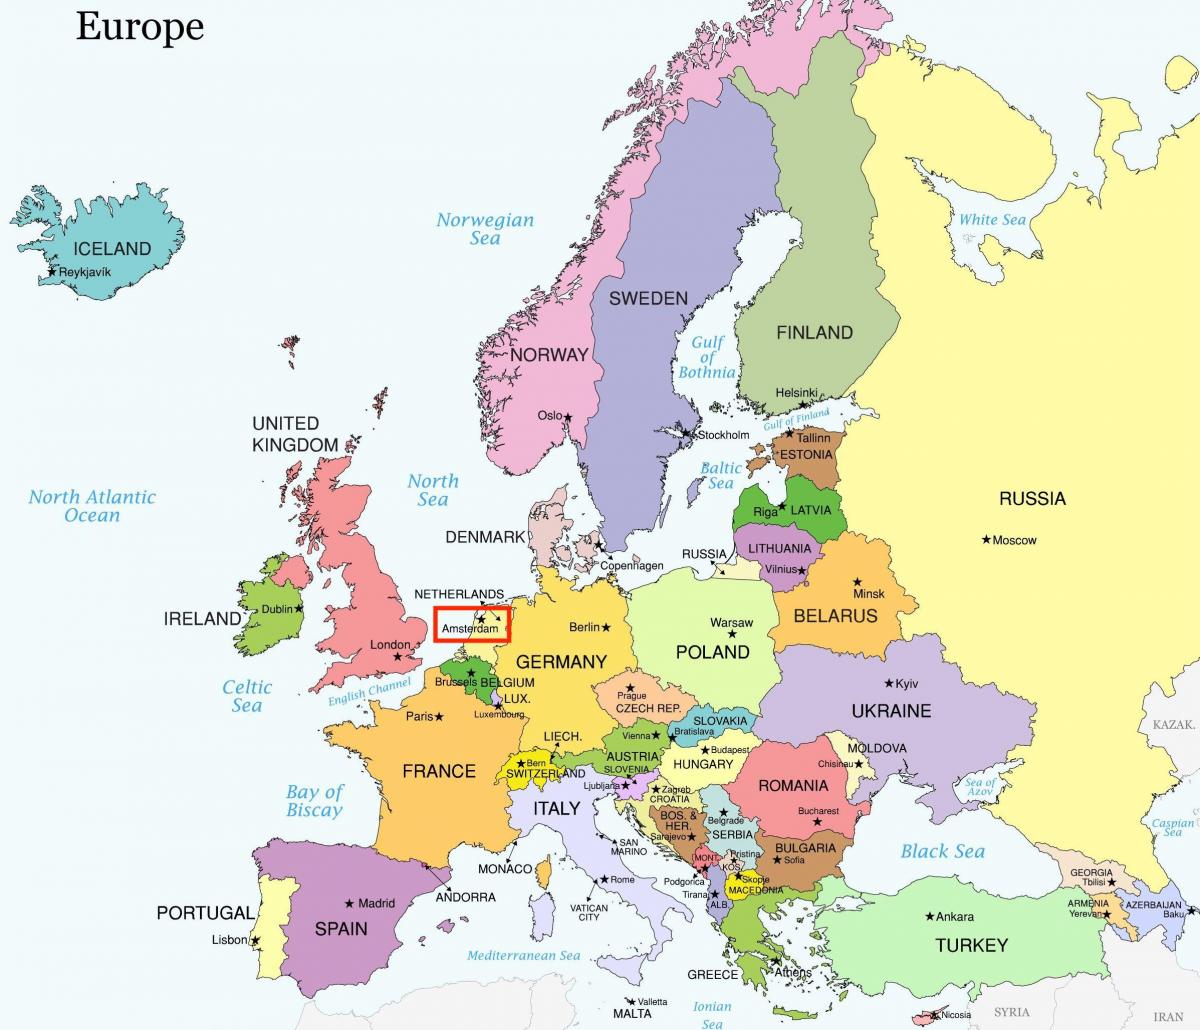 Amsterdam map europe - Amsterdam on the map of europe (Netherlands)